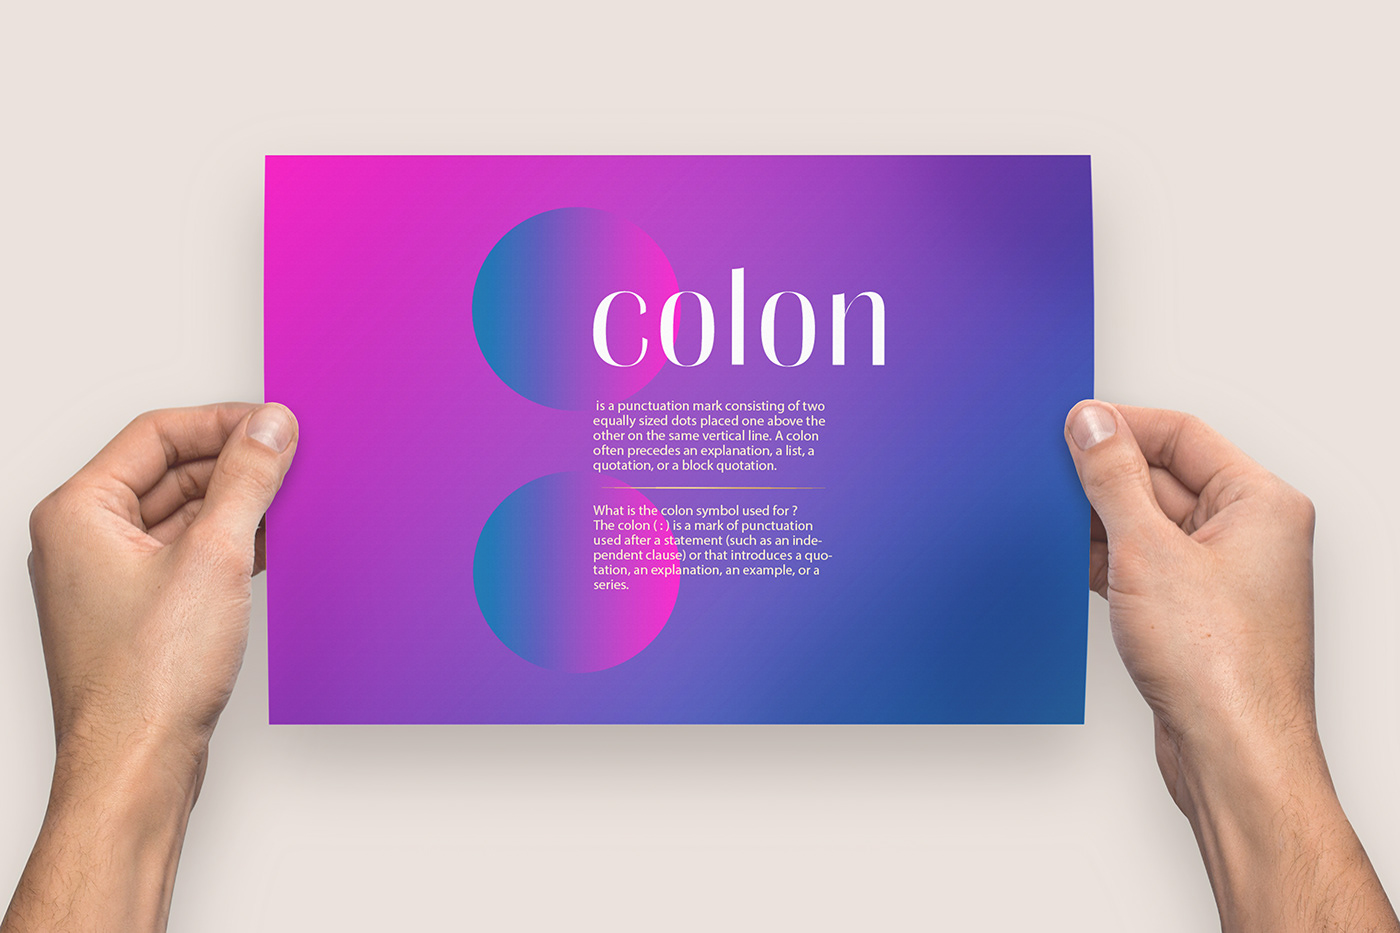 Layout layouts layoutdesign Colon colony typography design typographic colon layout